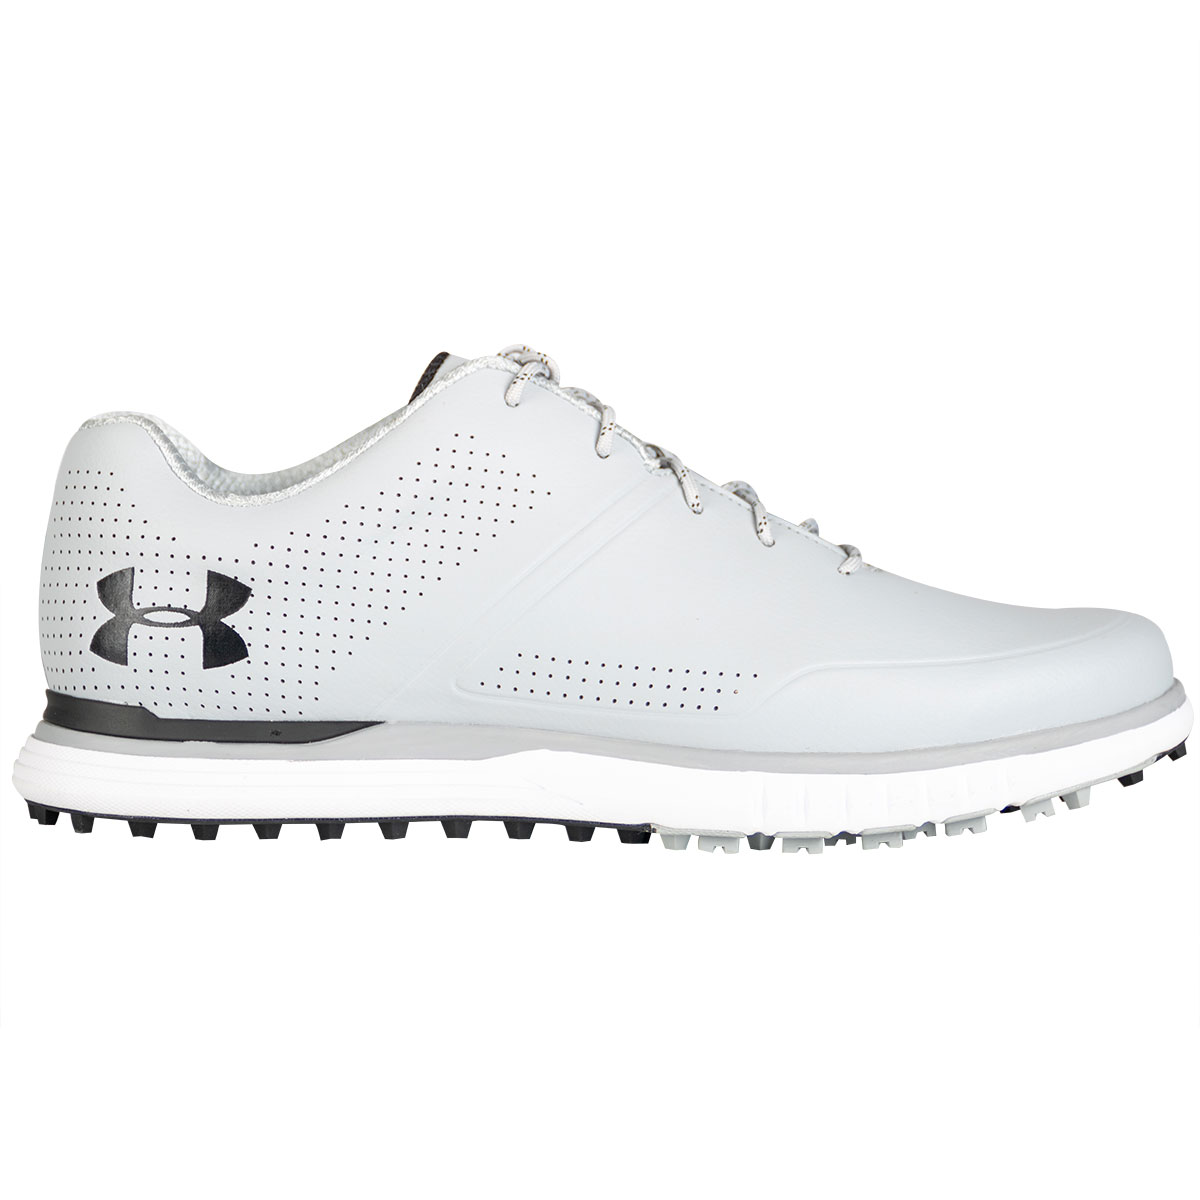 219 under armour golf shoes